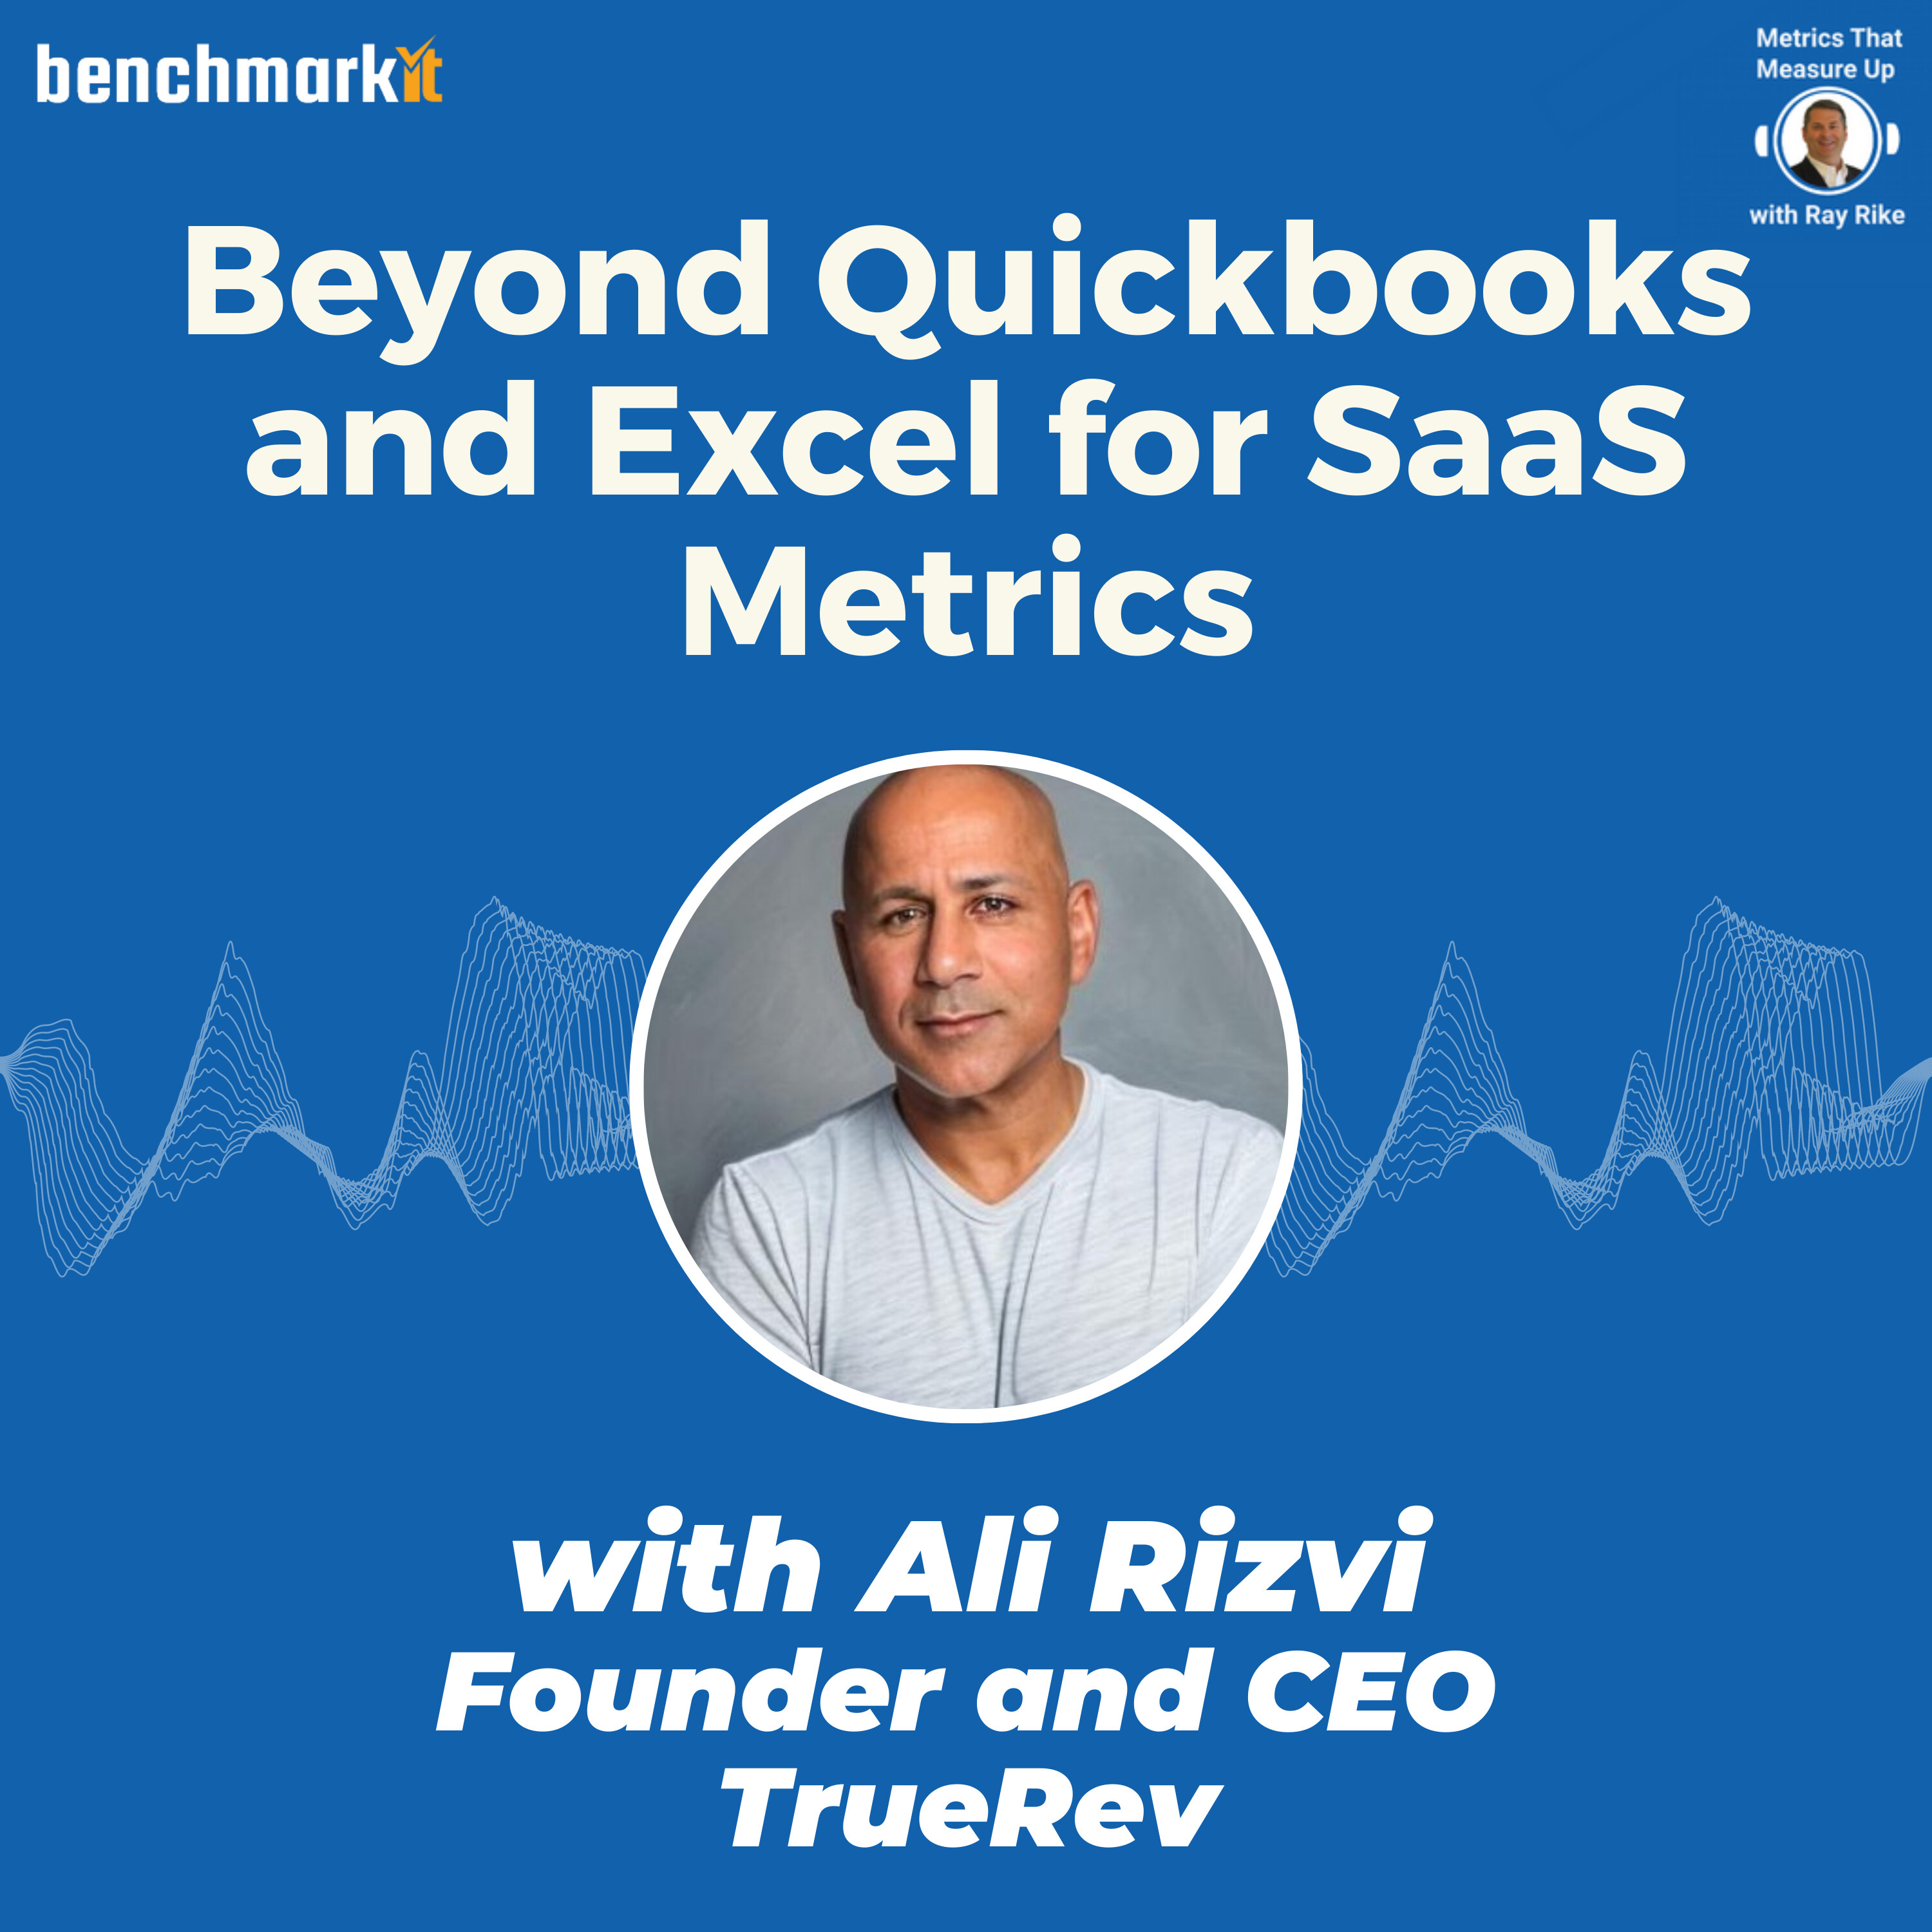 Evolving from Excel for SaaS Financial and Metrics Reporting - with Ali Rizvi Founder and CEO, TrueRev